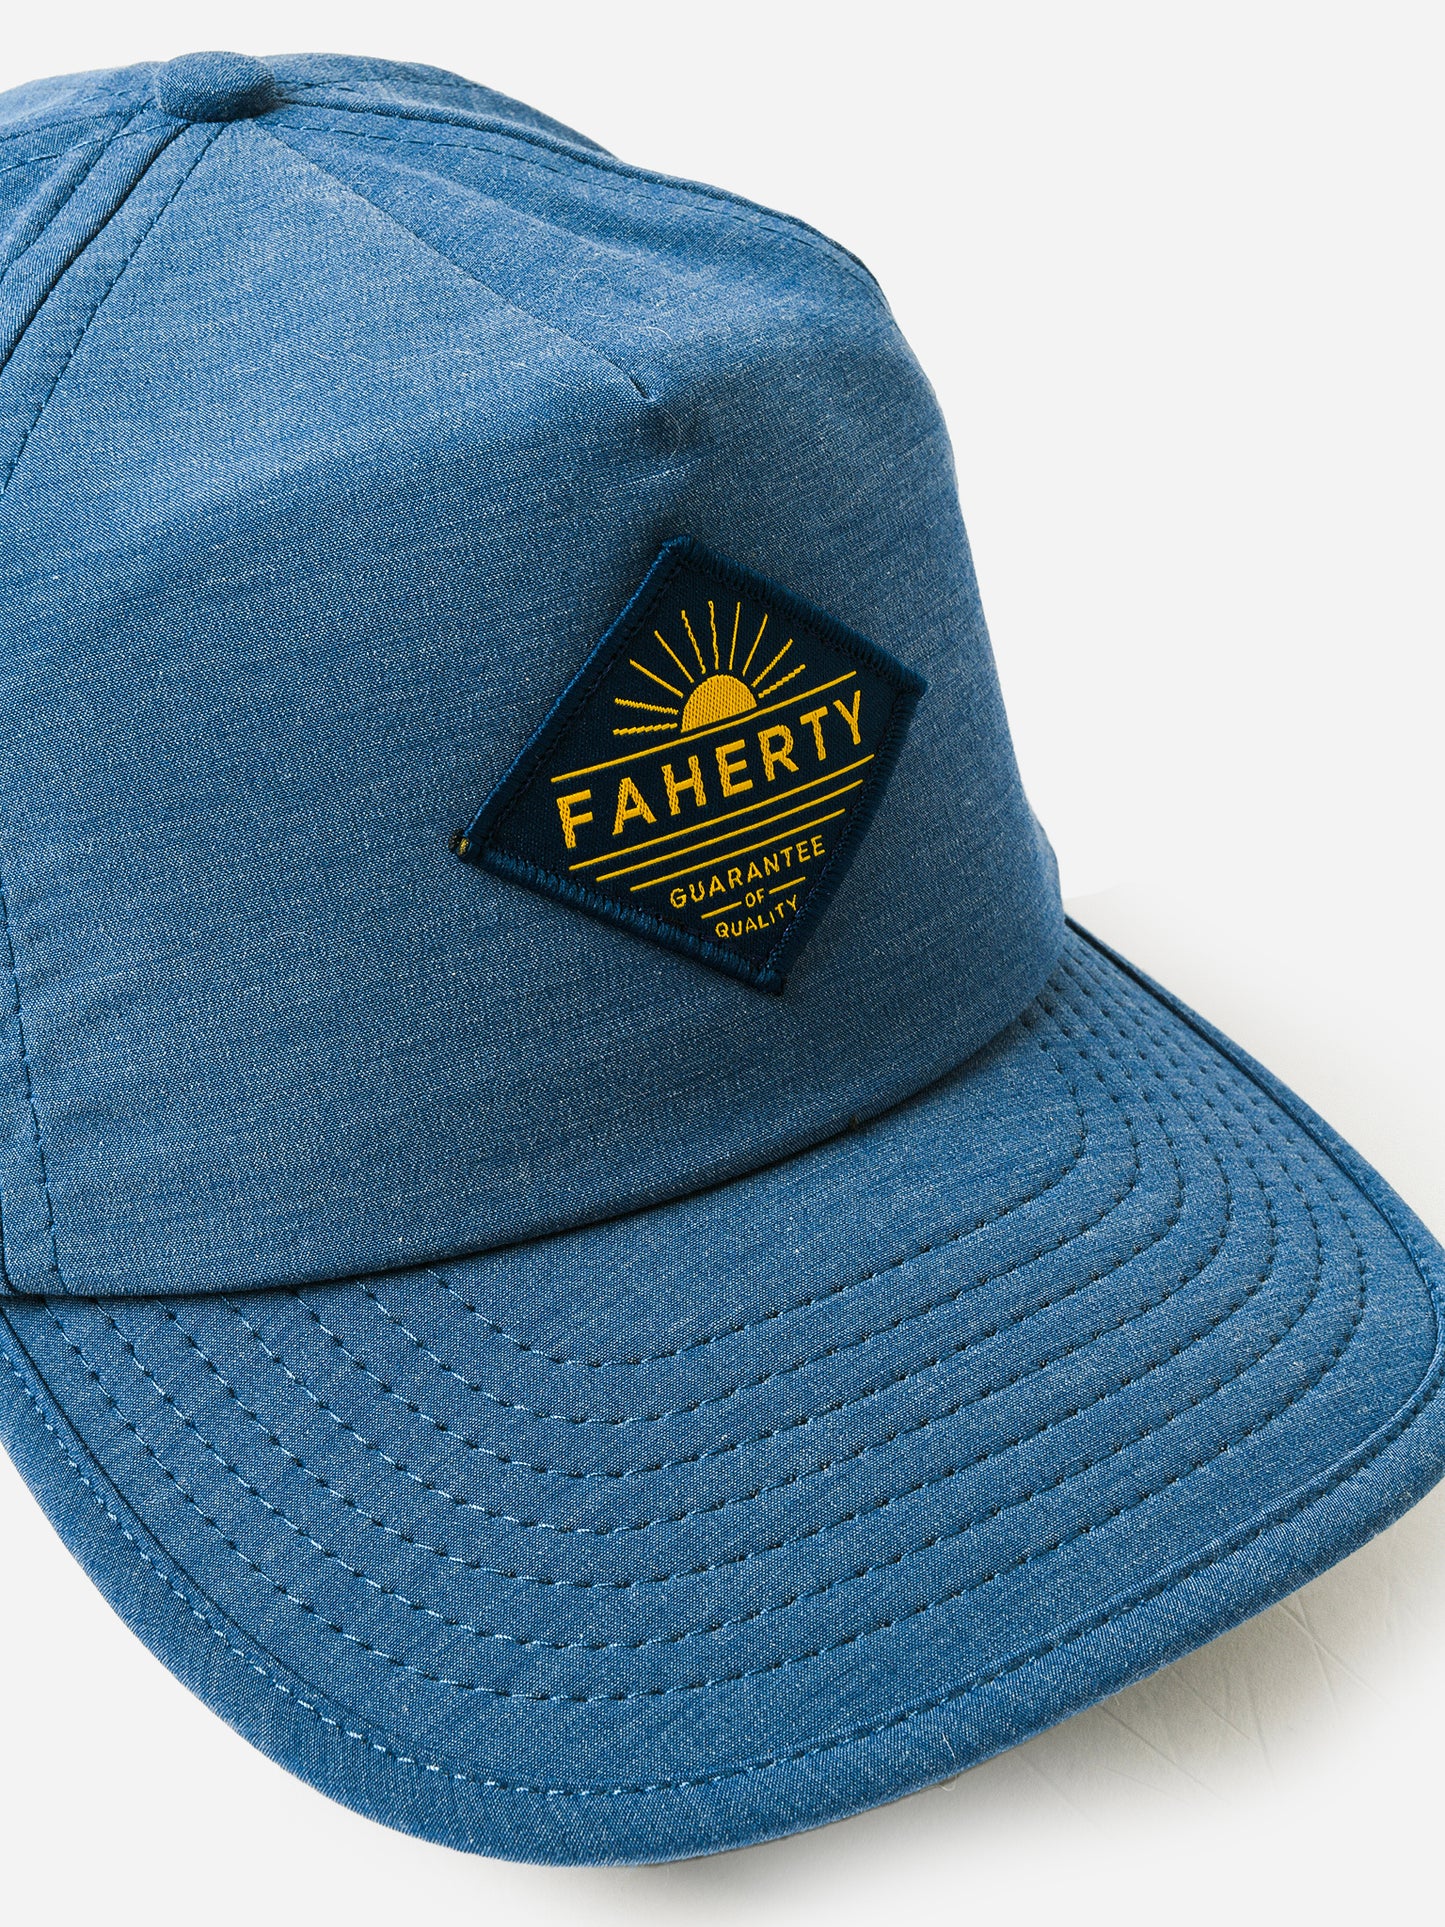 Faherty Brand Men's All Day Hat